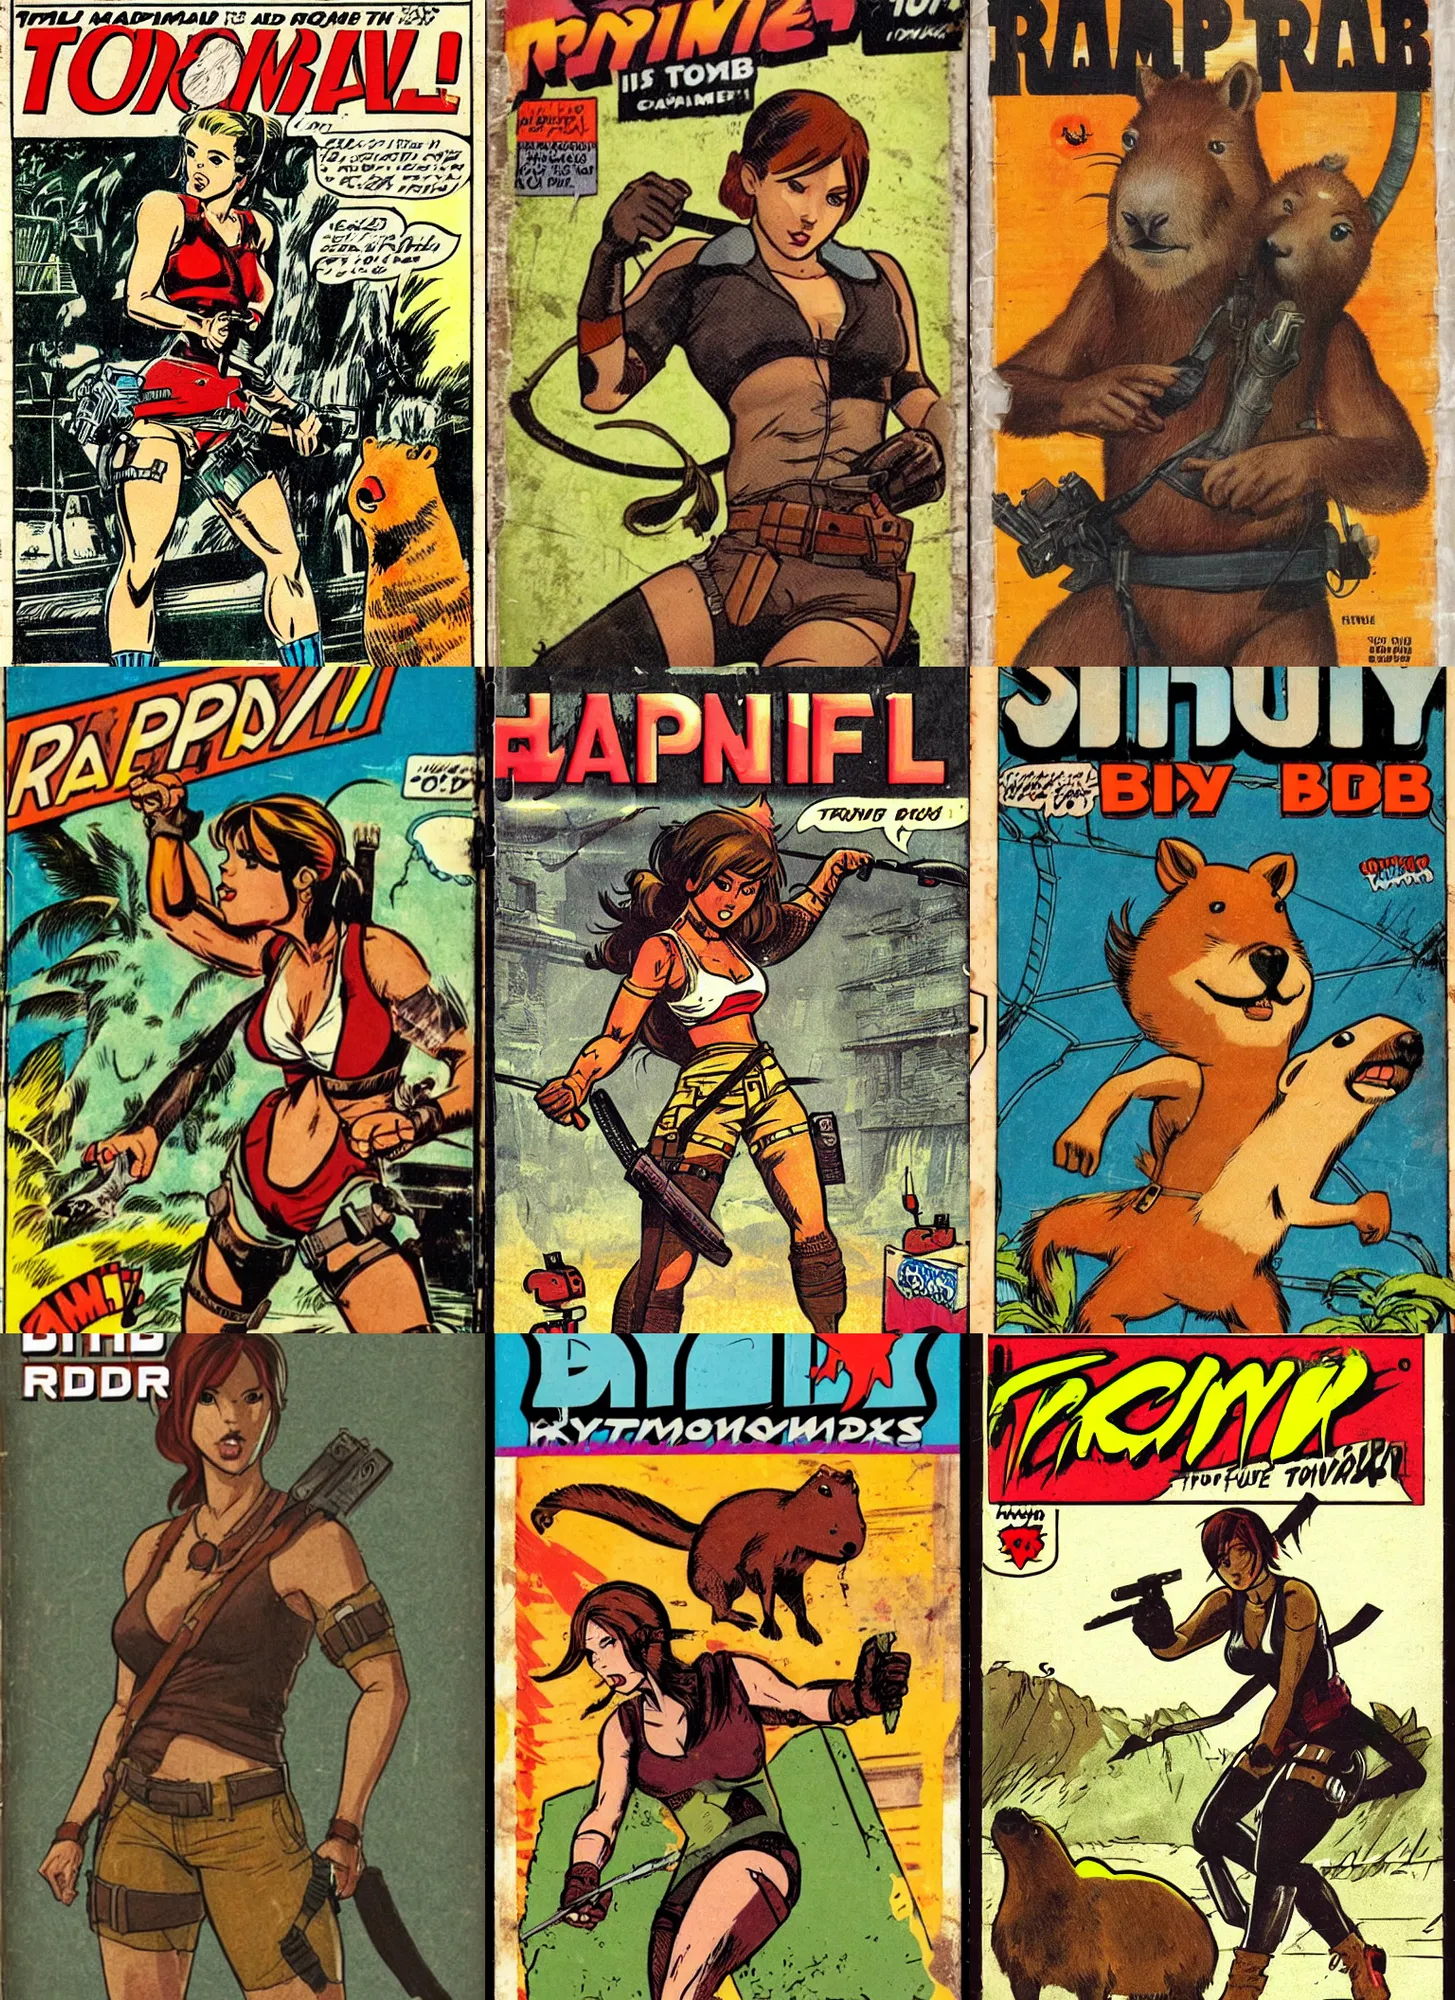 Prompt: retro comic book cover of an anthropomorphic capybara as tomb raider videogame